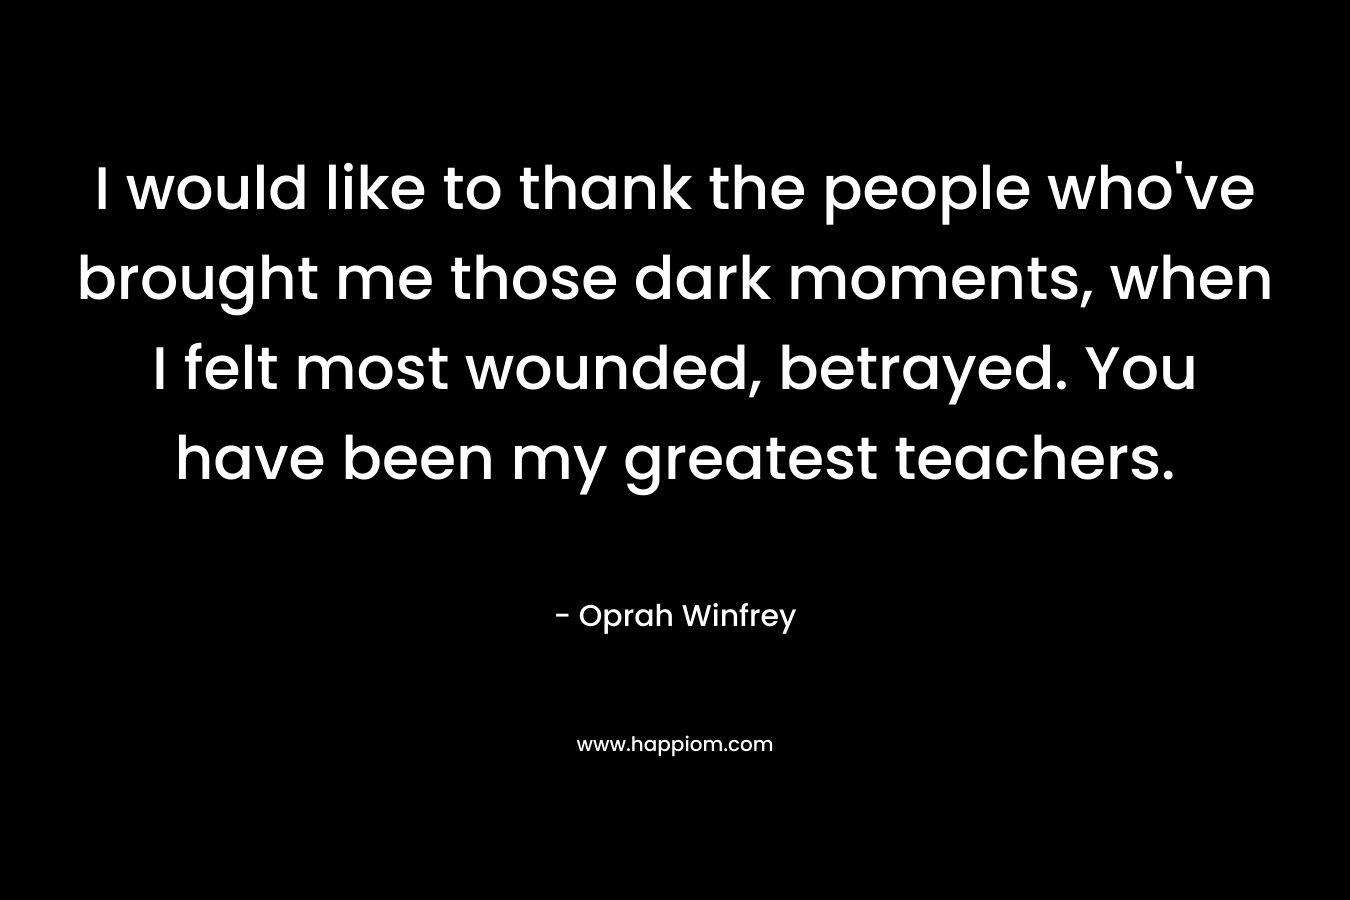 I would like to thank the people who’ve brought me those dark moments, when I felt most wounded, betrayed. You have been my greatest teachers. – Oprah Winfrey